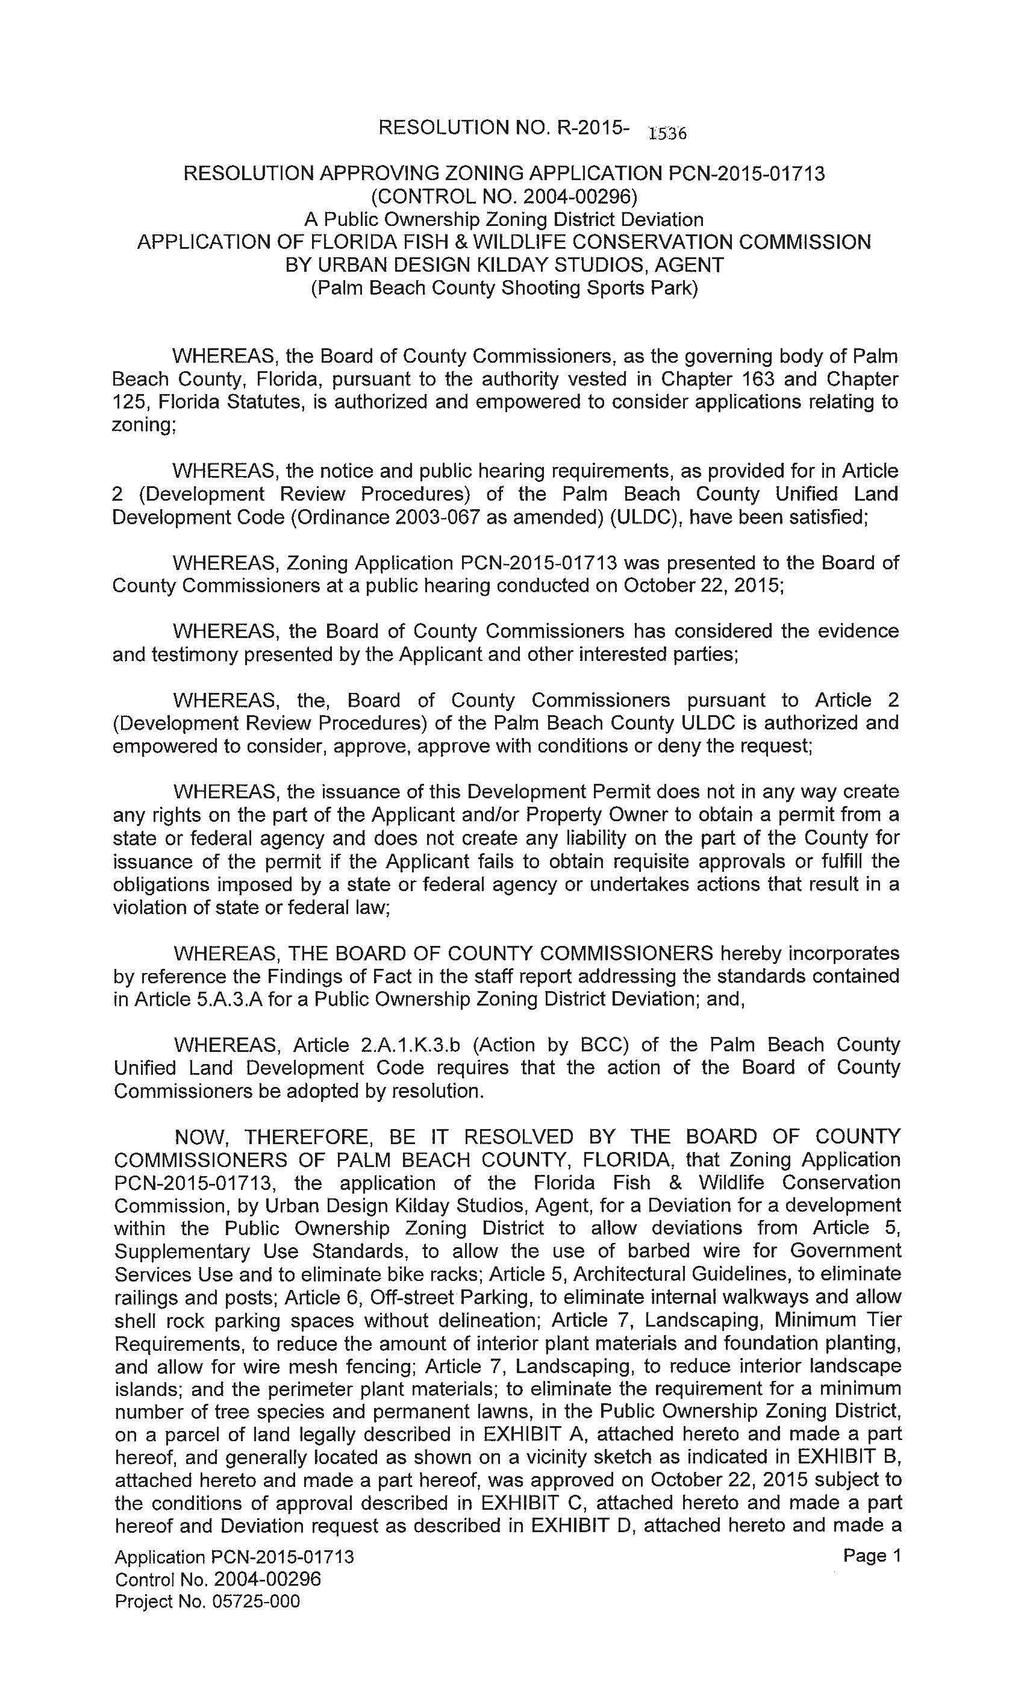 RESOLUTION NO. R-2015-1536 RESOLUTION APPROVING ZONING APPLICATION PCN-2015-01713 (CONTROL NO.